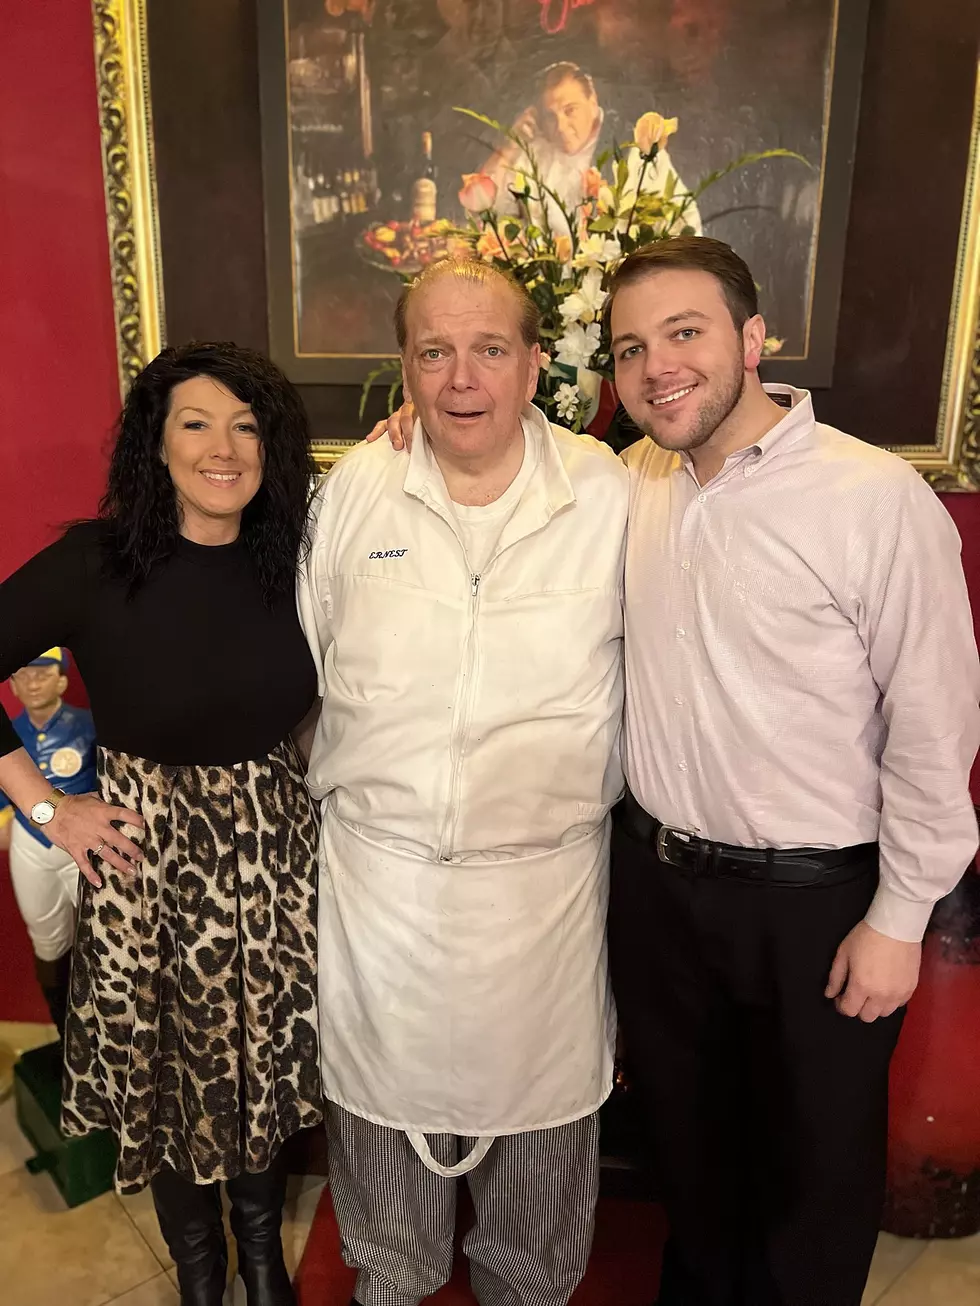 Chef Ernest Palmisano is this Week’s Caught in the Act Recipient